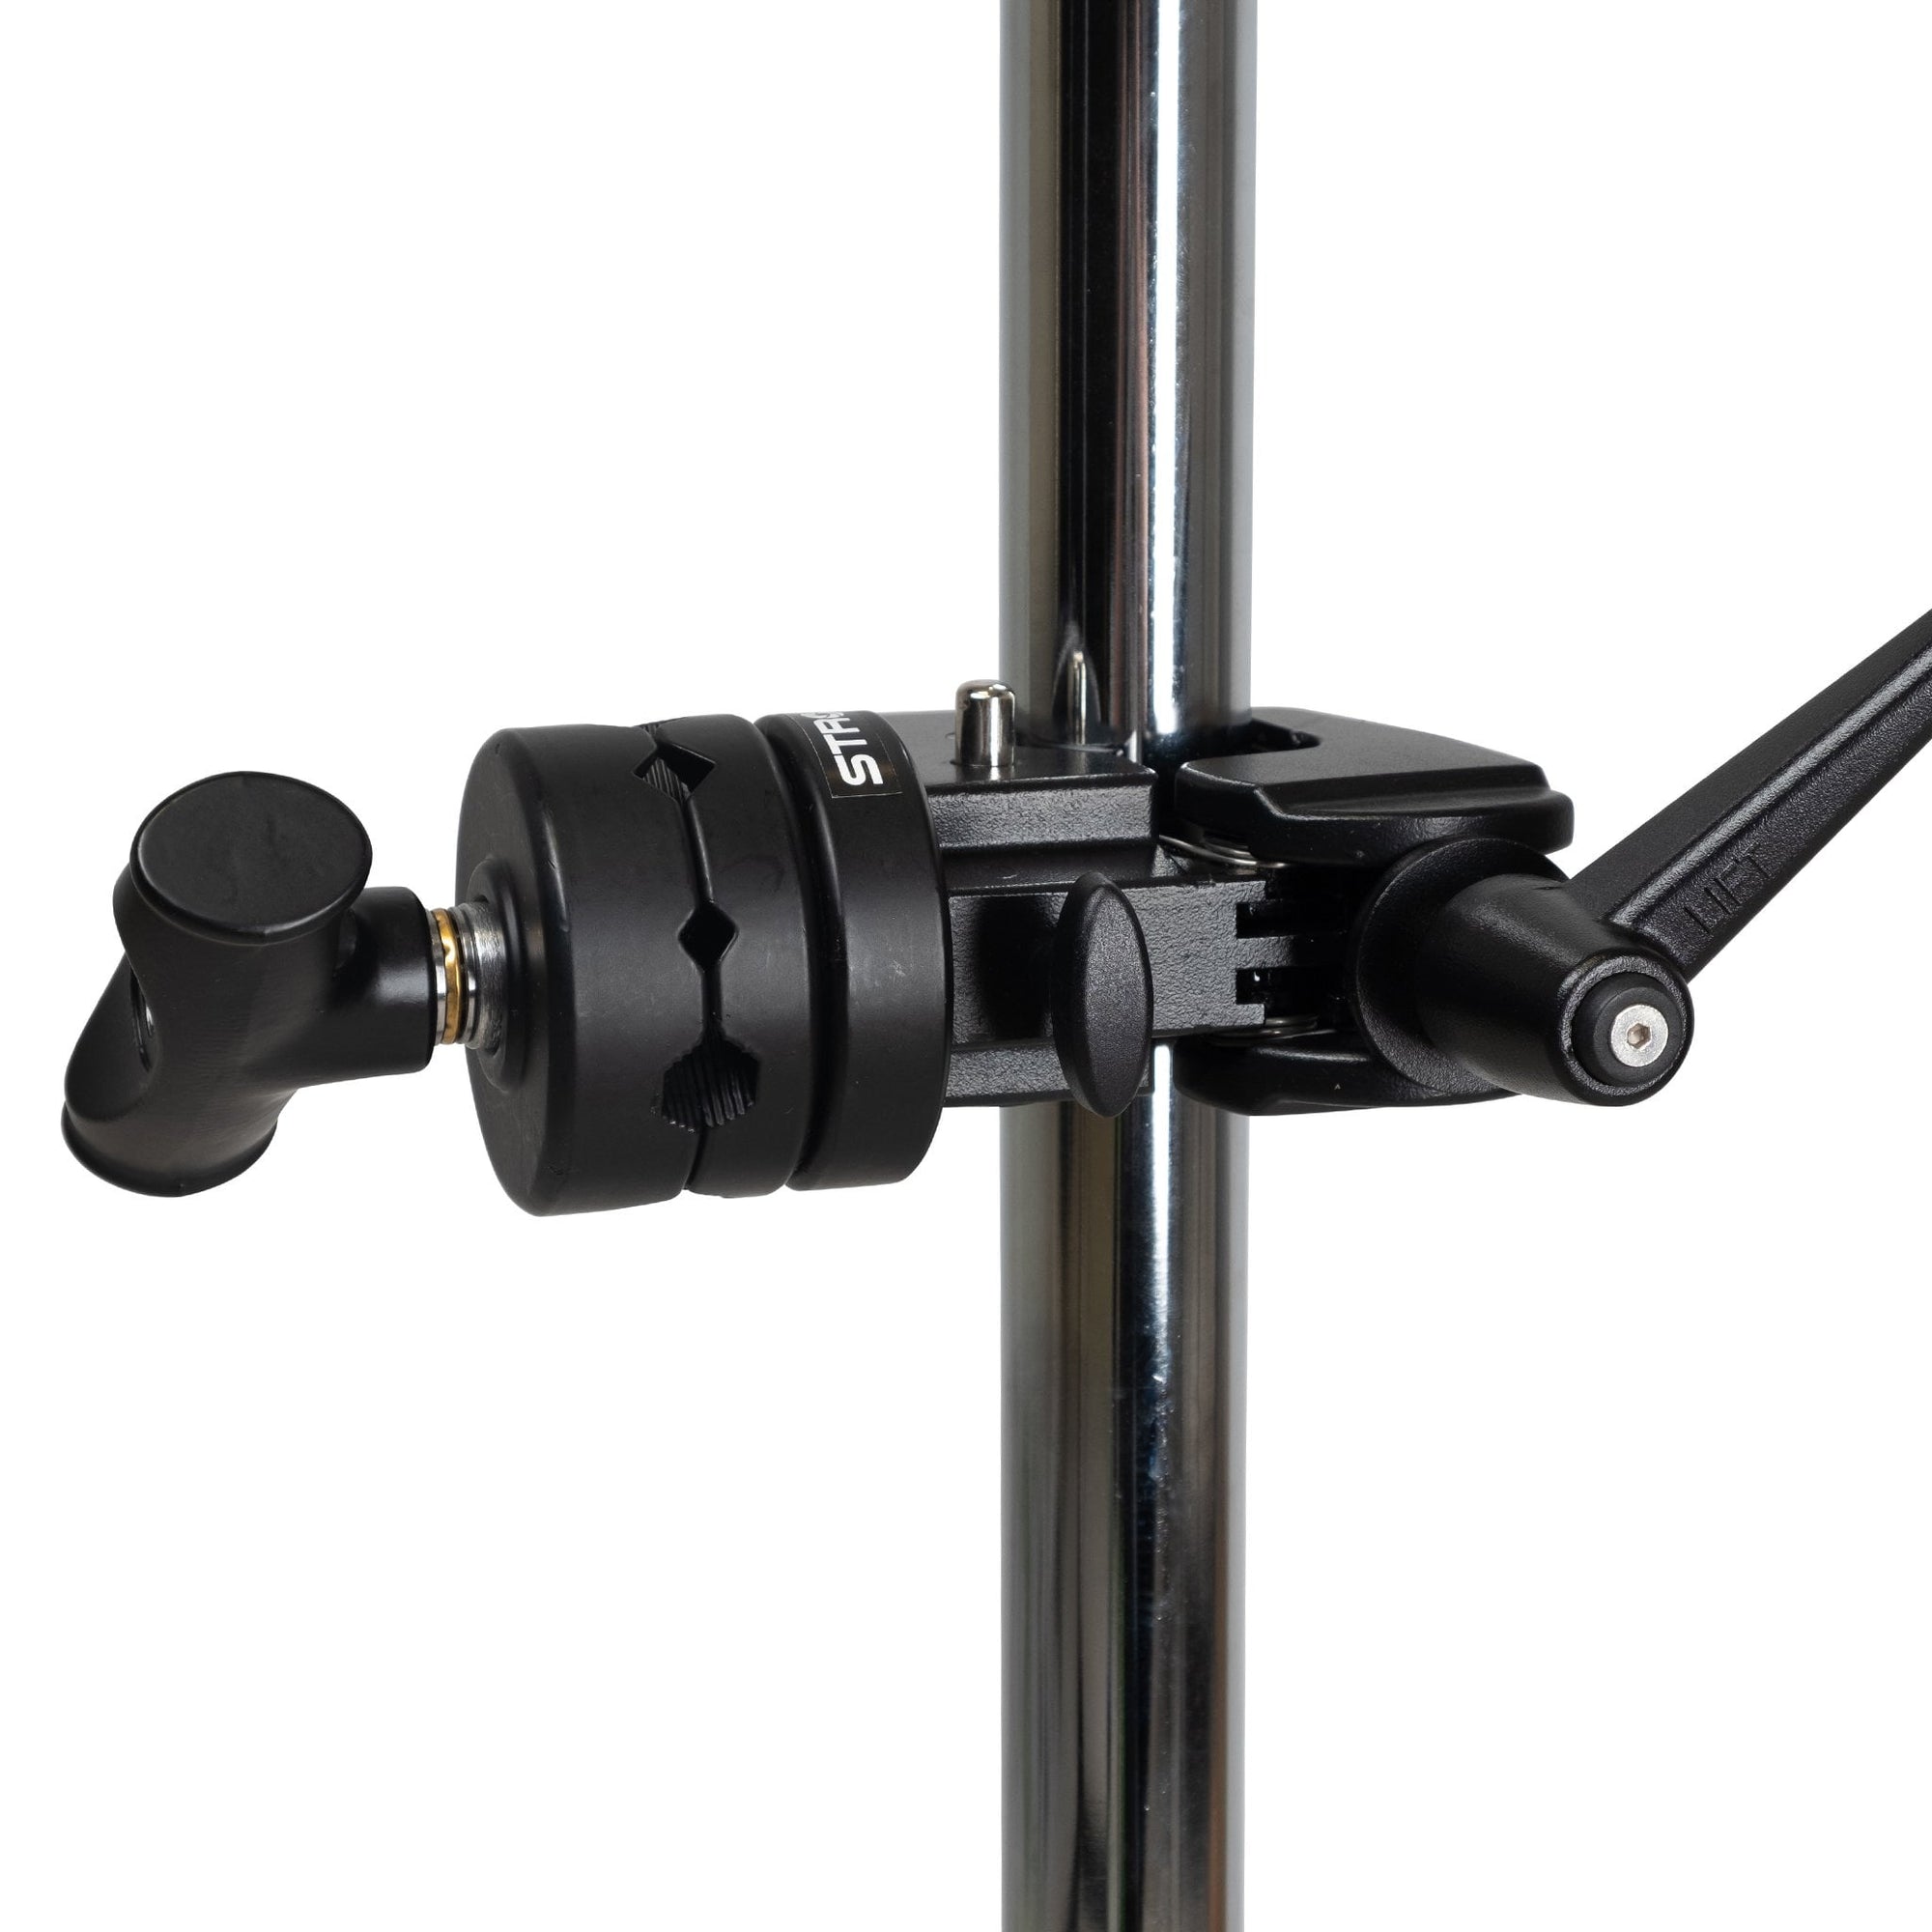 Strobepro Super Clamp with Grip Head